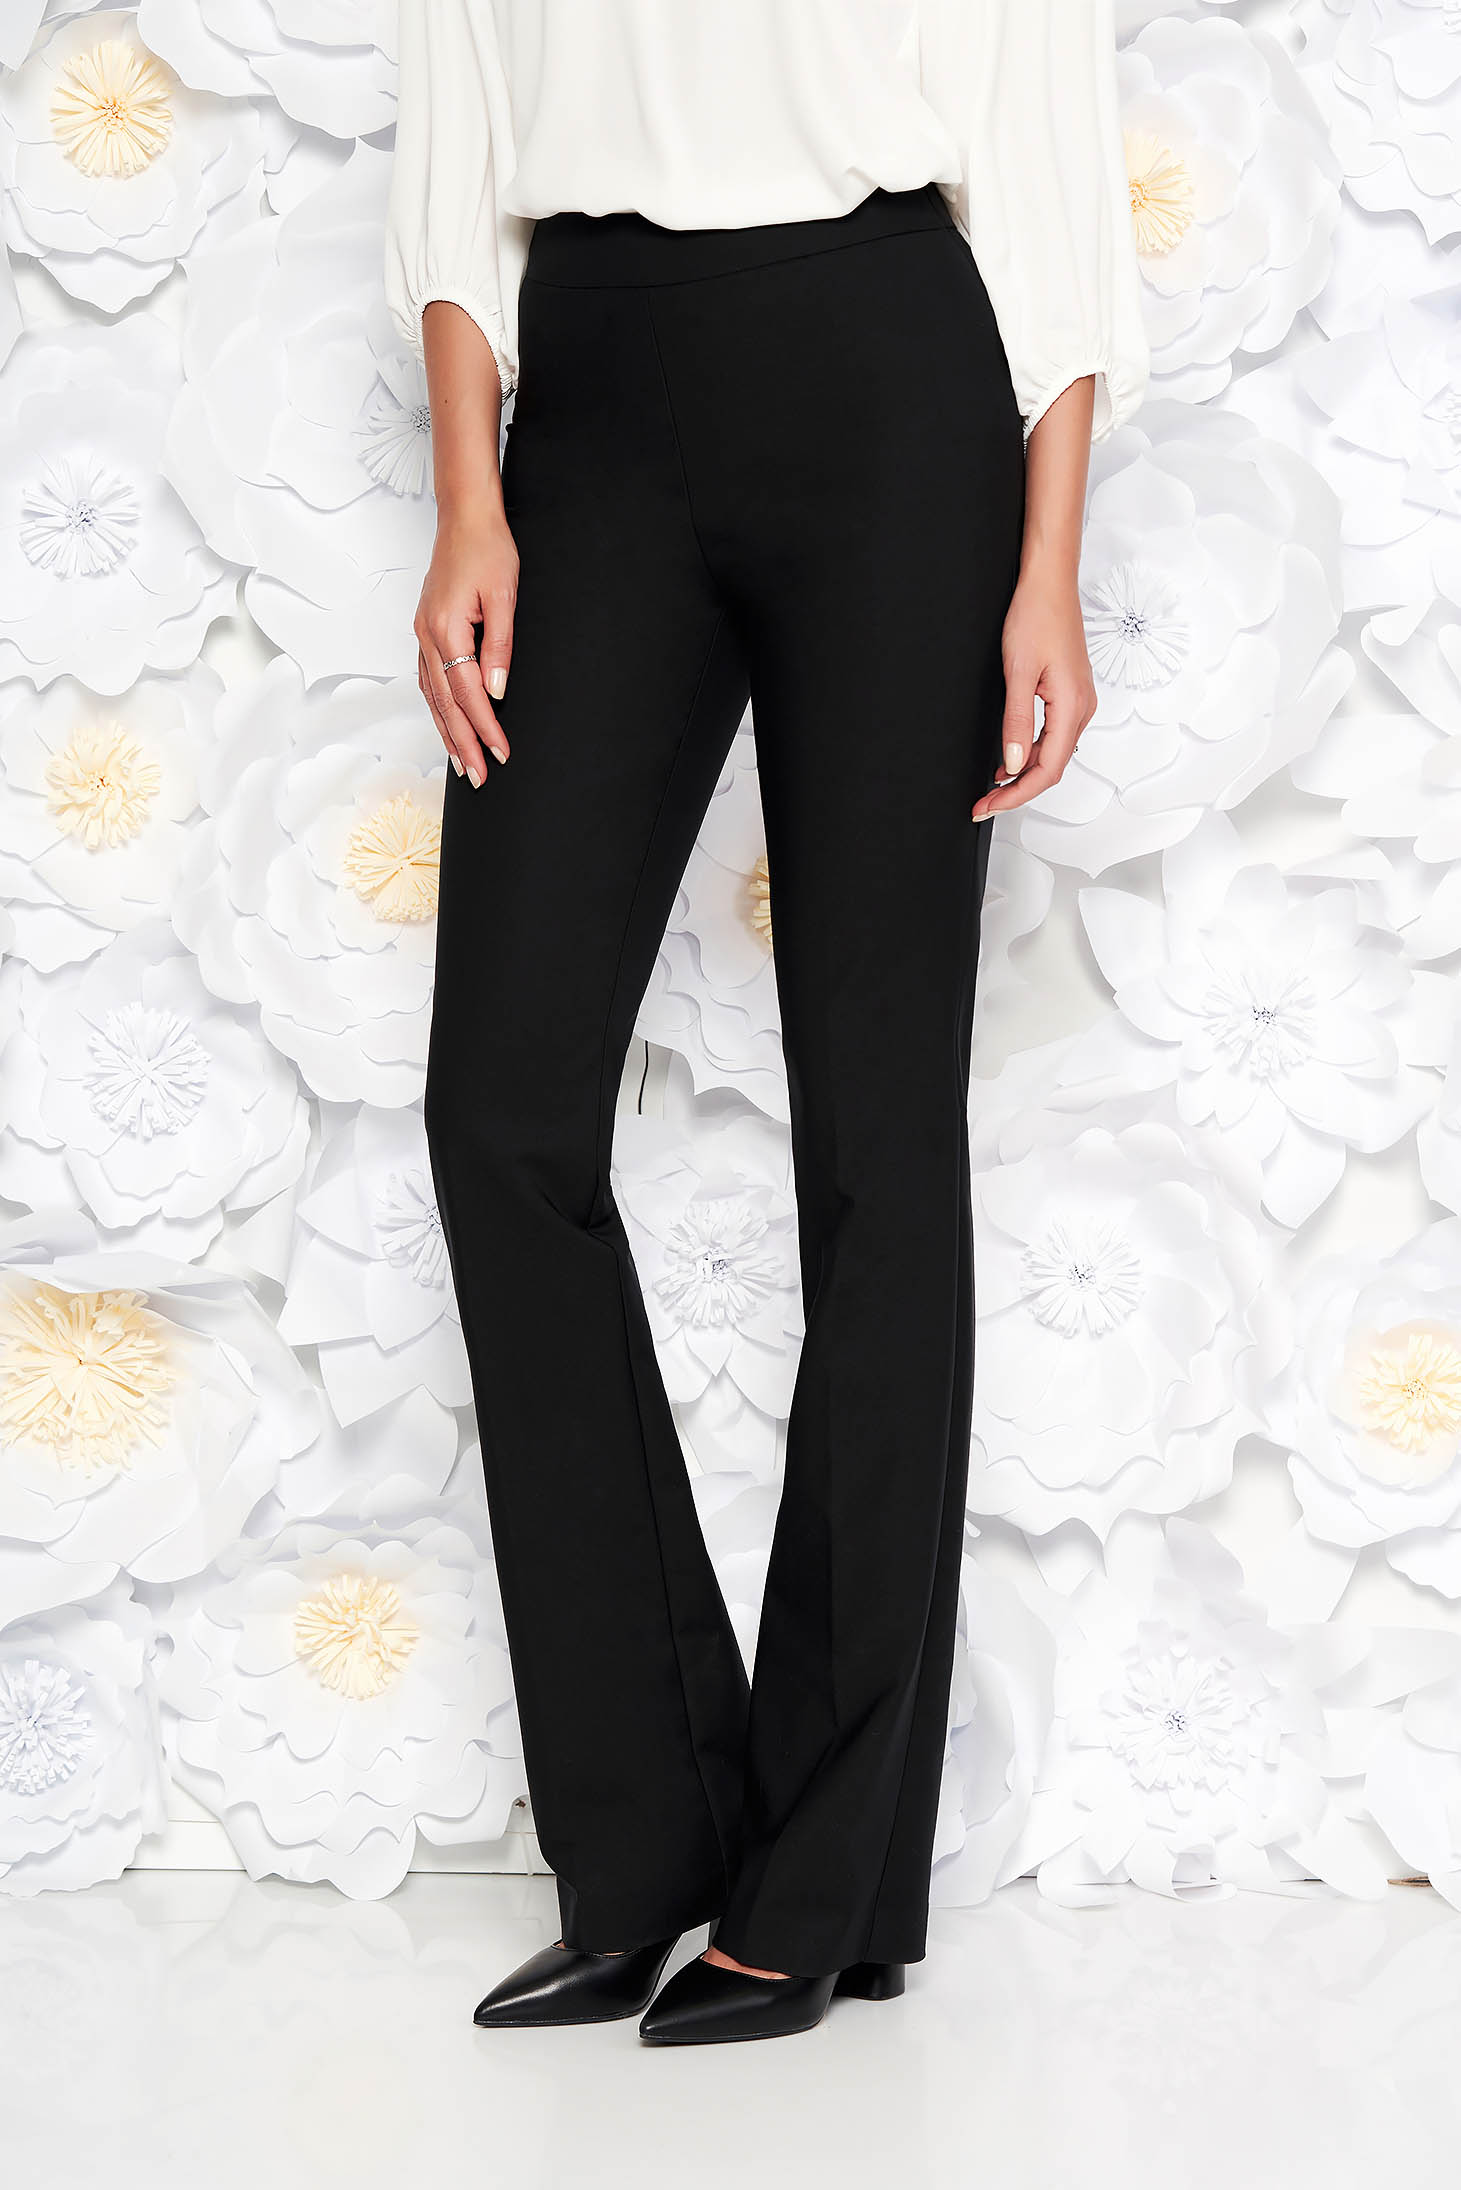 Black office flared trousers nonelastic cotton with medium waist